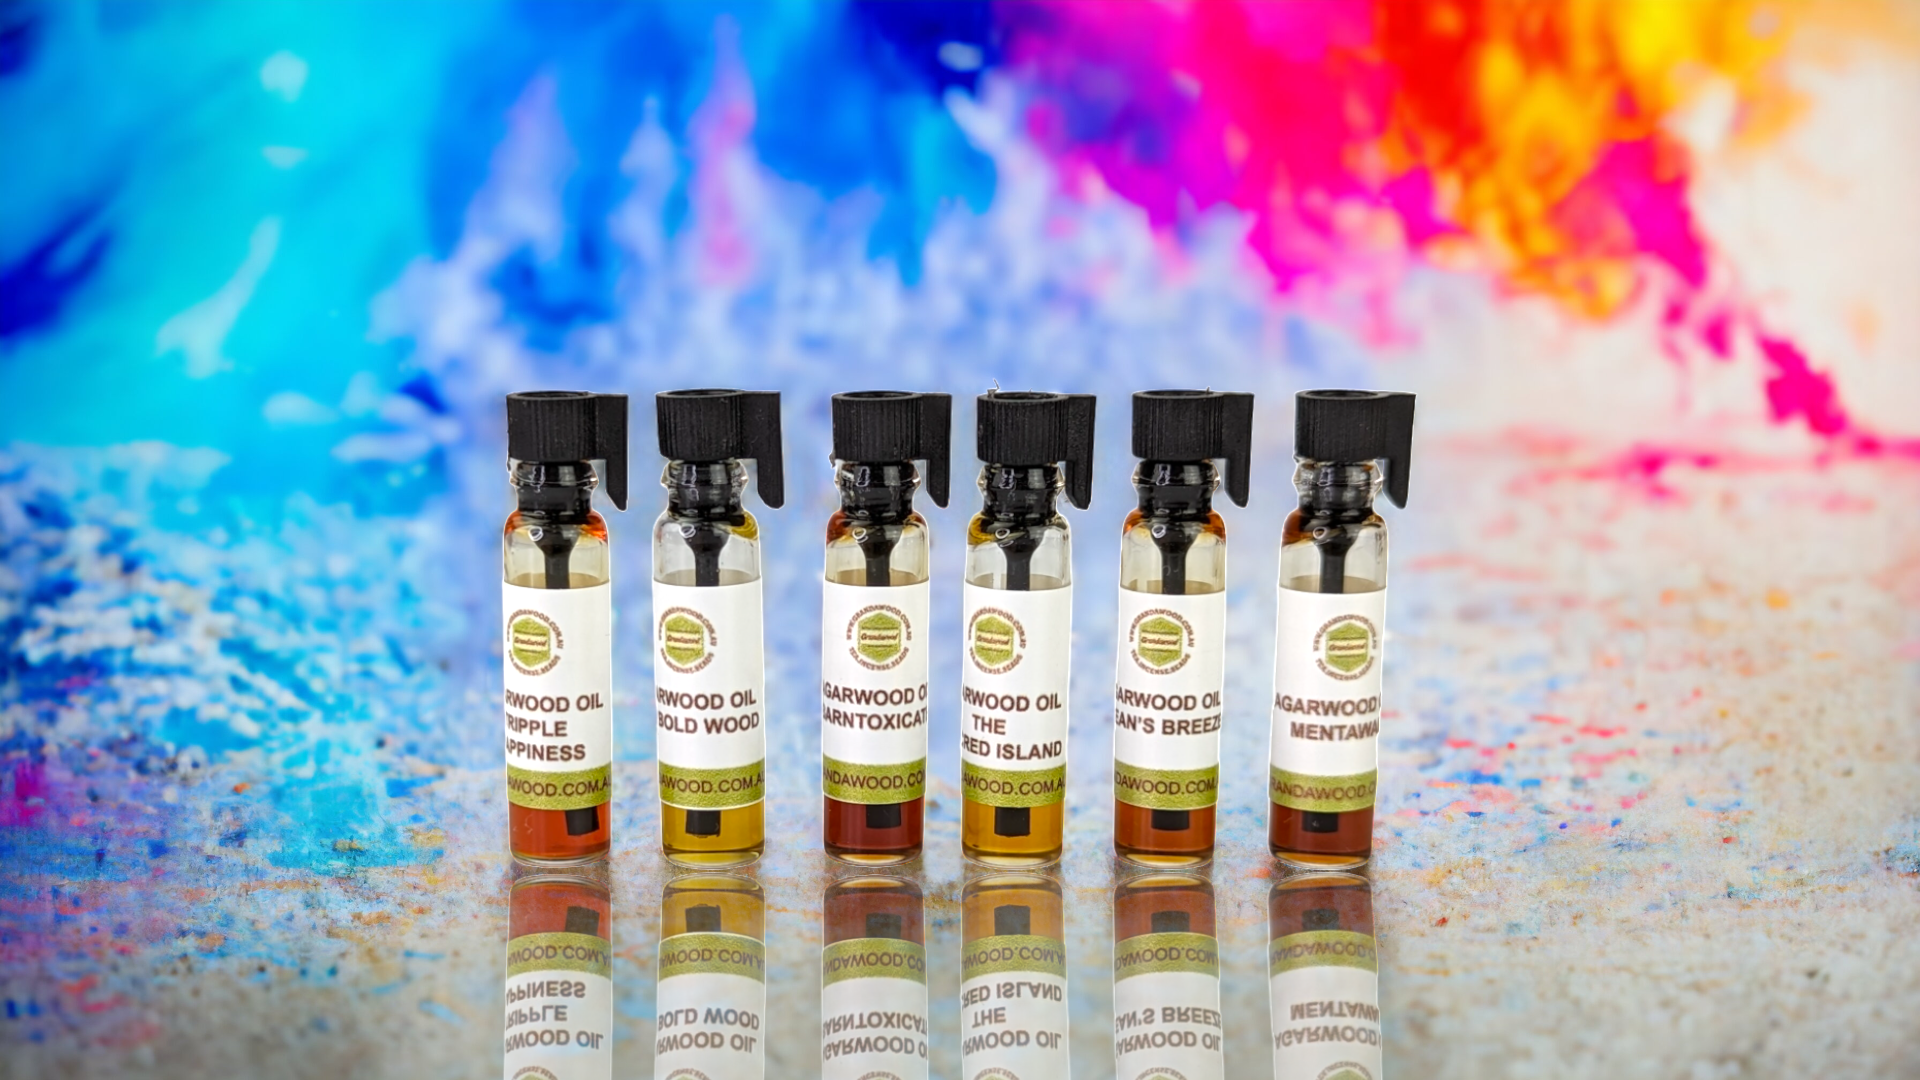 Agarwood (Oud) Essential Oil Sample Kit- To people who want to smell genuine Oud but can't get started - Wild Agarwood (Oud) Oil / 0.5ml